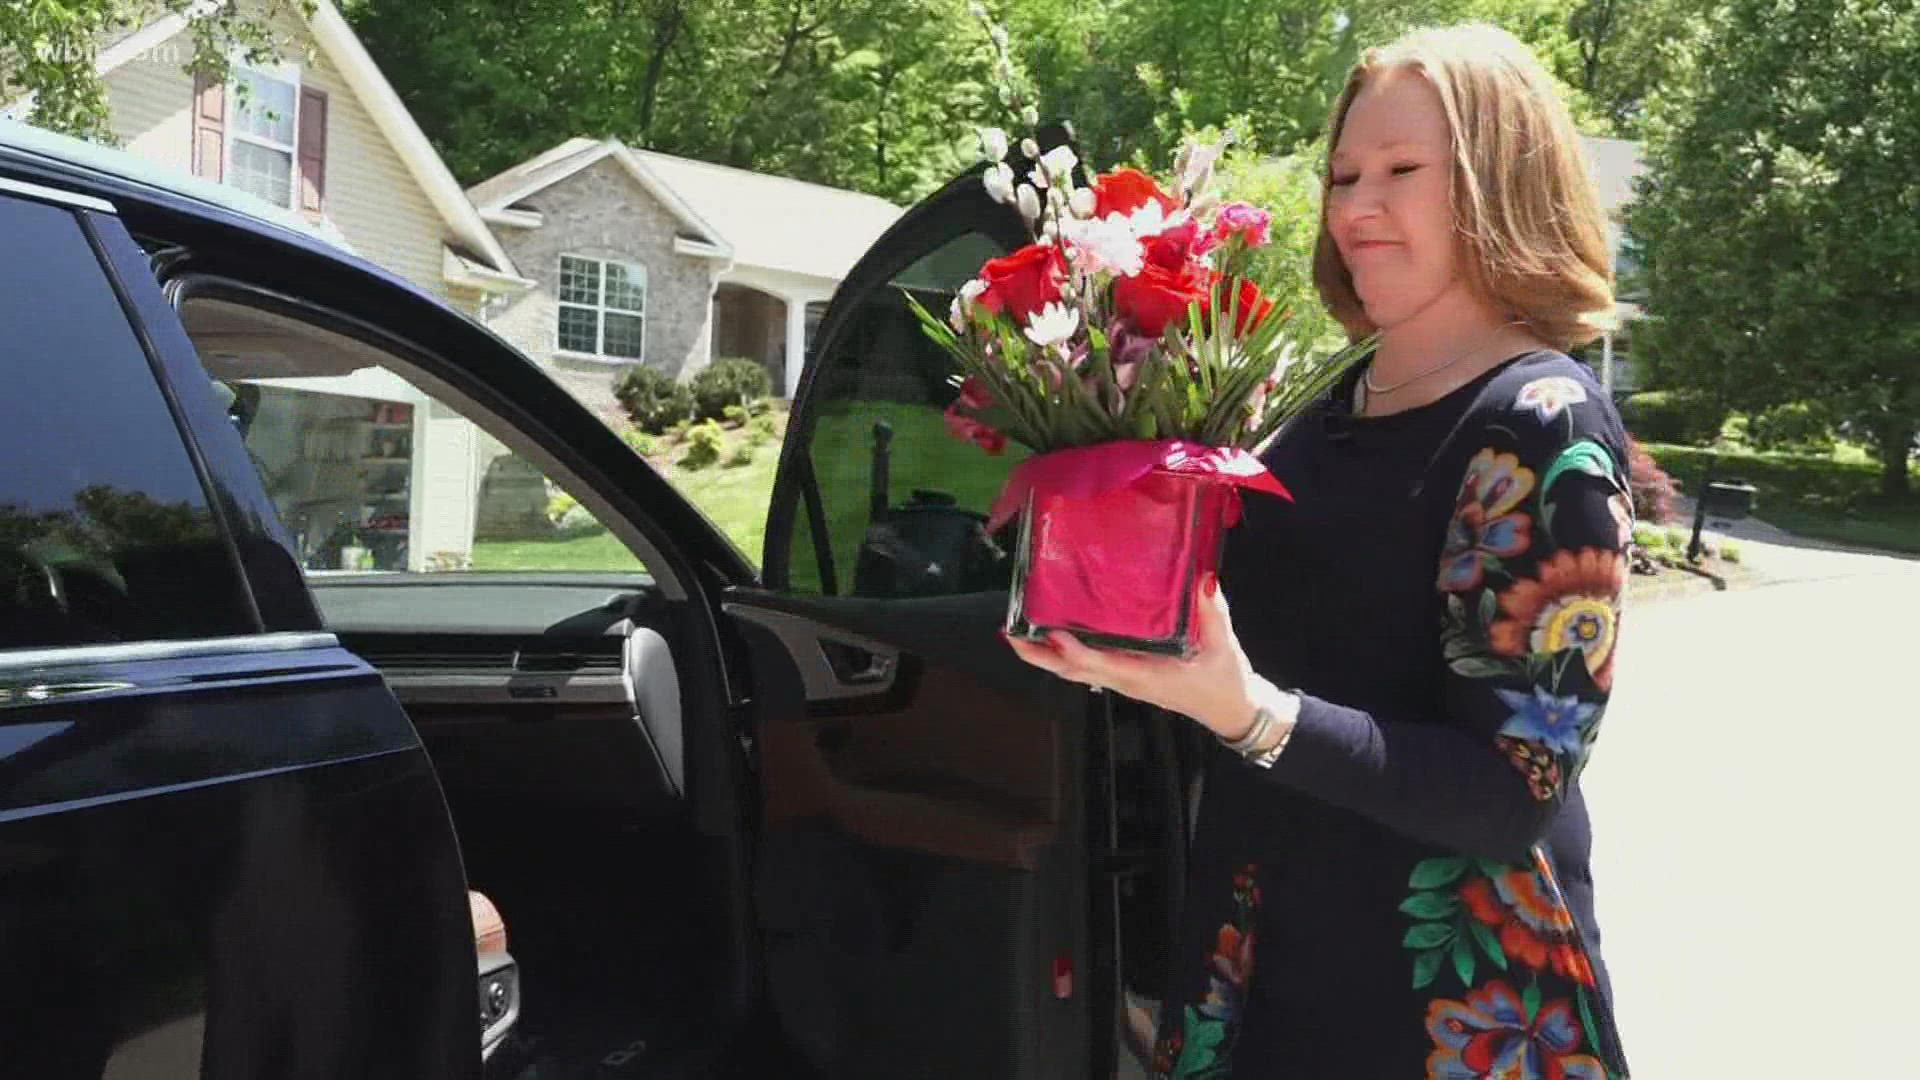 Breast Connect and Random Acts of Flowers are committed to helping breast cancer fighters heal through bouquet deliveries.